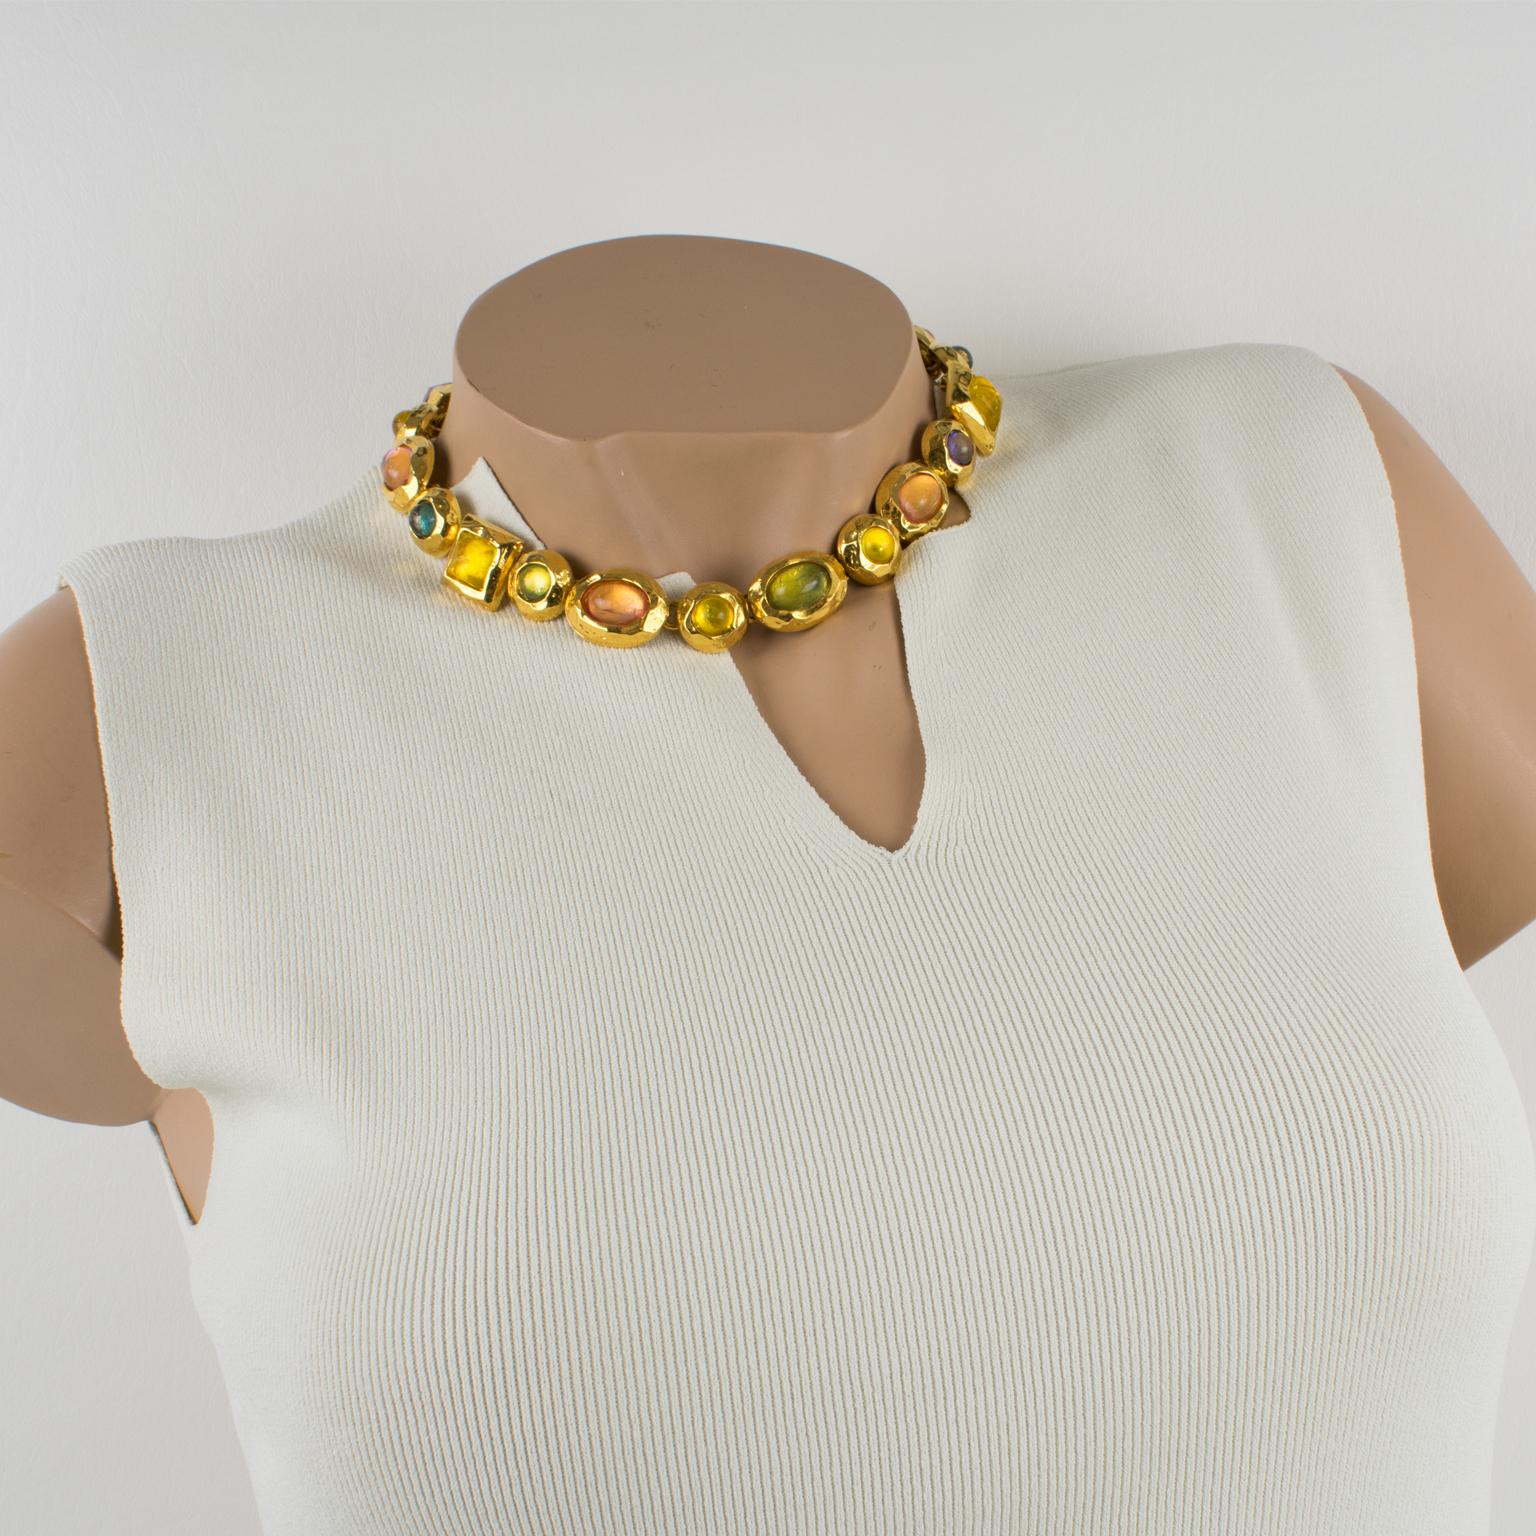 Stunning French designer Edouard Rambaud Paris jeweled choker necklace. Around the necklace shape with a shiny gilded metal framing ornate with round, square, and ovoid-shaped resin cabochons. Assorted colors of yellow, light pink, purple lavender,